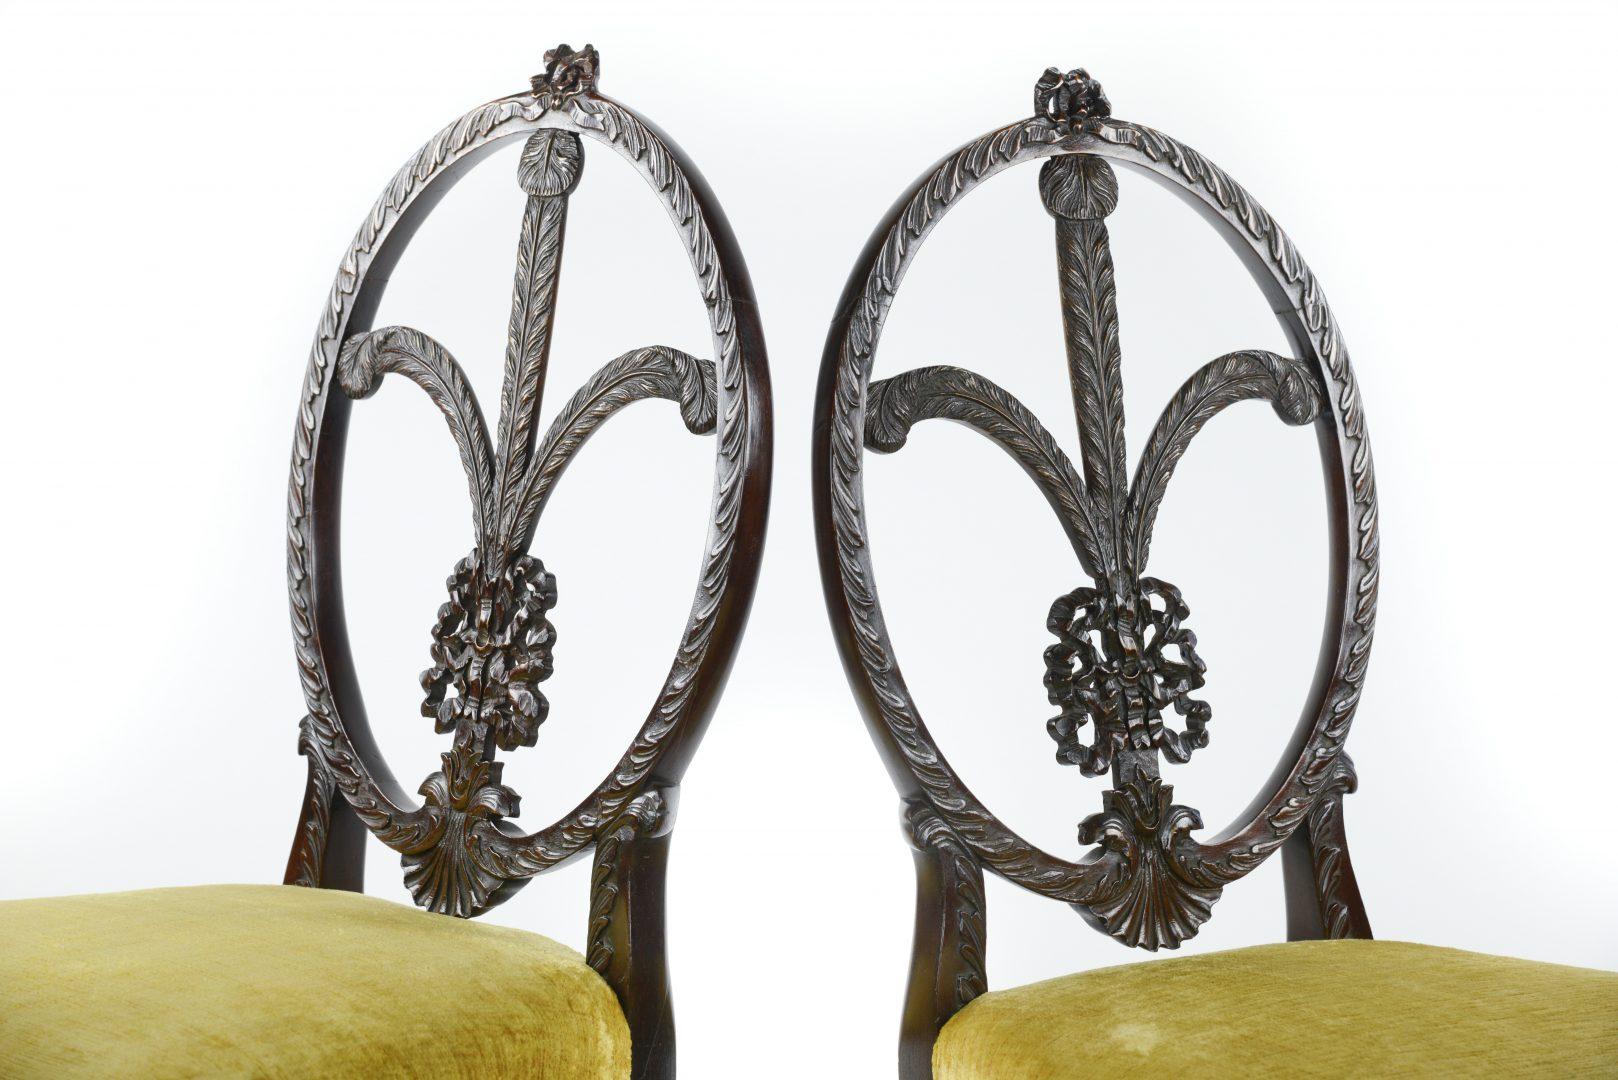 A pair of mahogany Sheraton style children’s chairs each with carved Prince of Wales feather backs.
Highly unusual delicate fine quality pair of chairs made for a fine house in the Sheraton style.